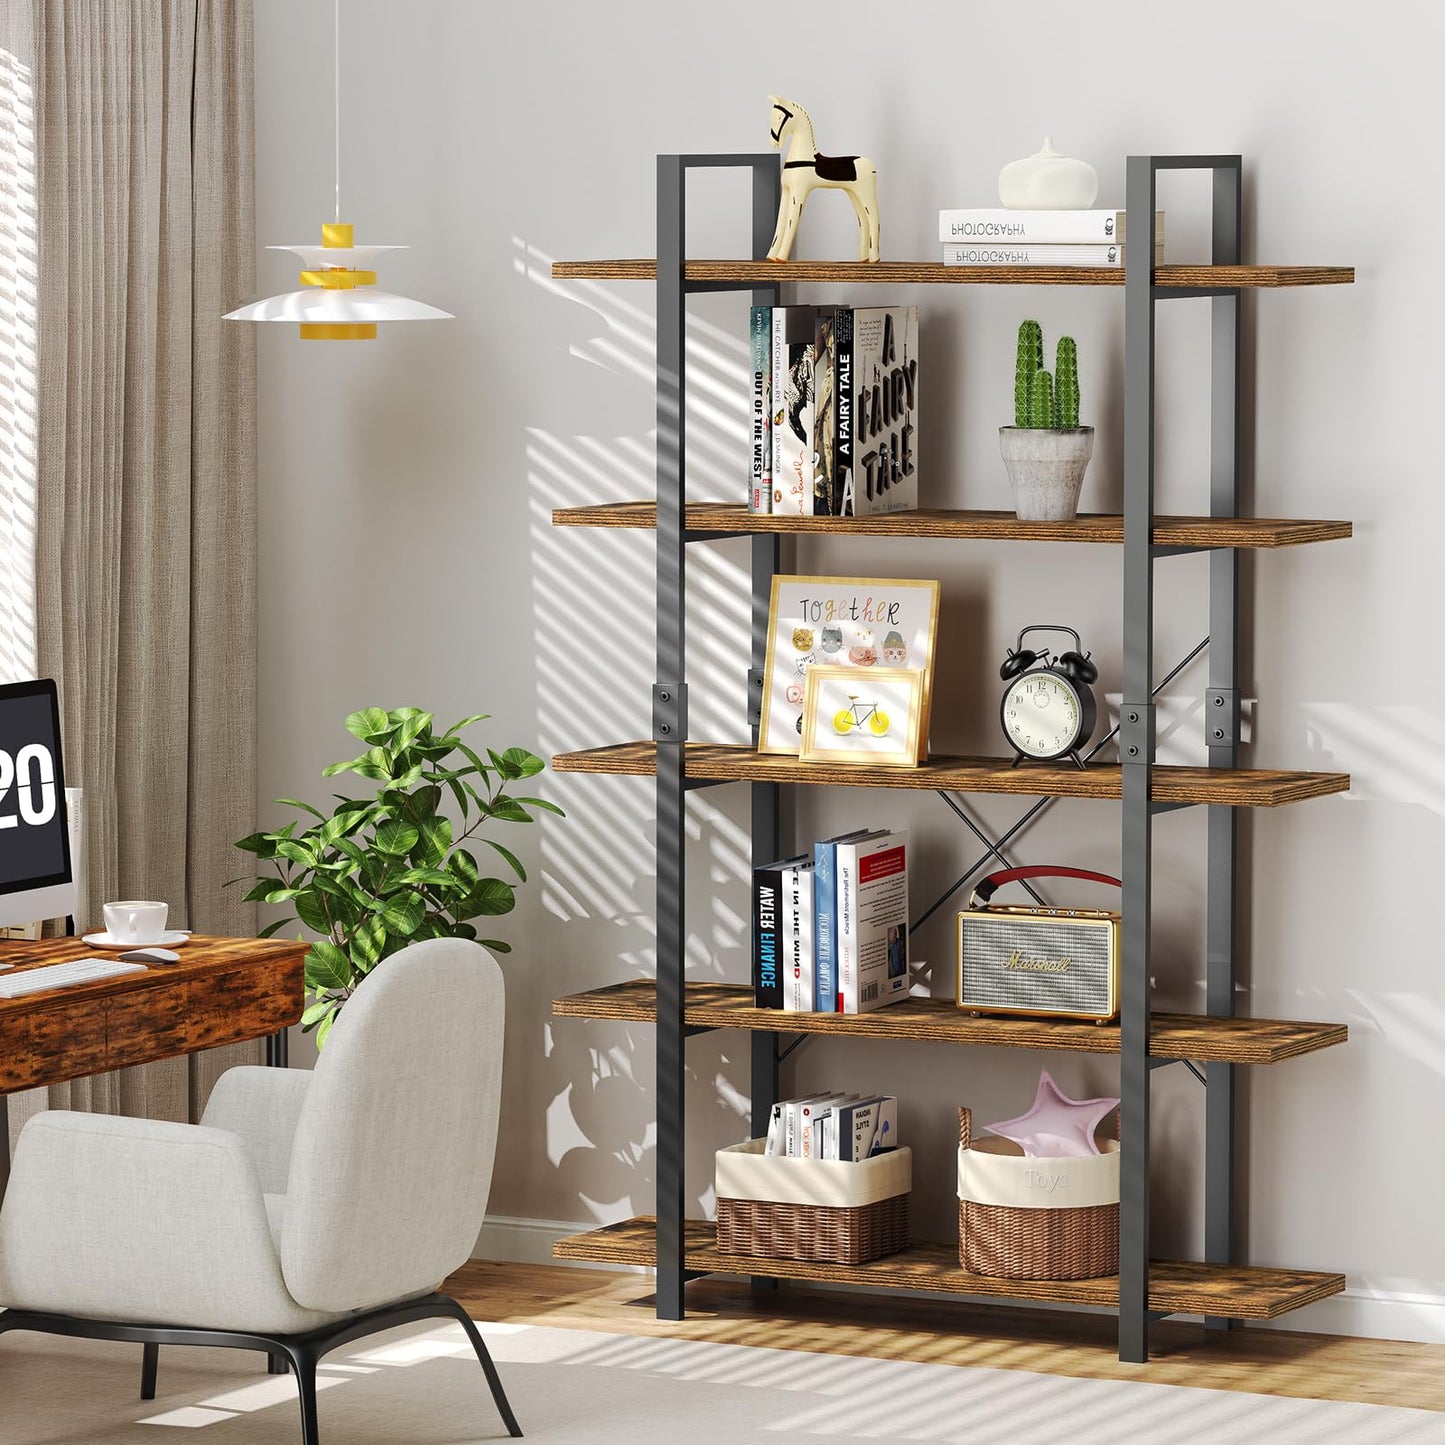 FRAPOW 5 Tier Bookshelf, 70 inch Tall Solid Bookcase Industrial Wooden Bookshelves Large Wall Etagere Rustic Vintage Book Shelf with Metal Frame Open